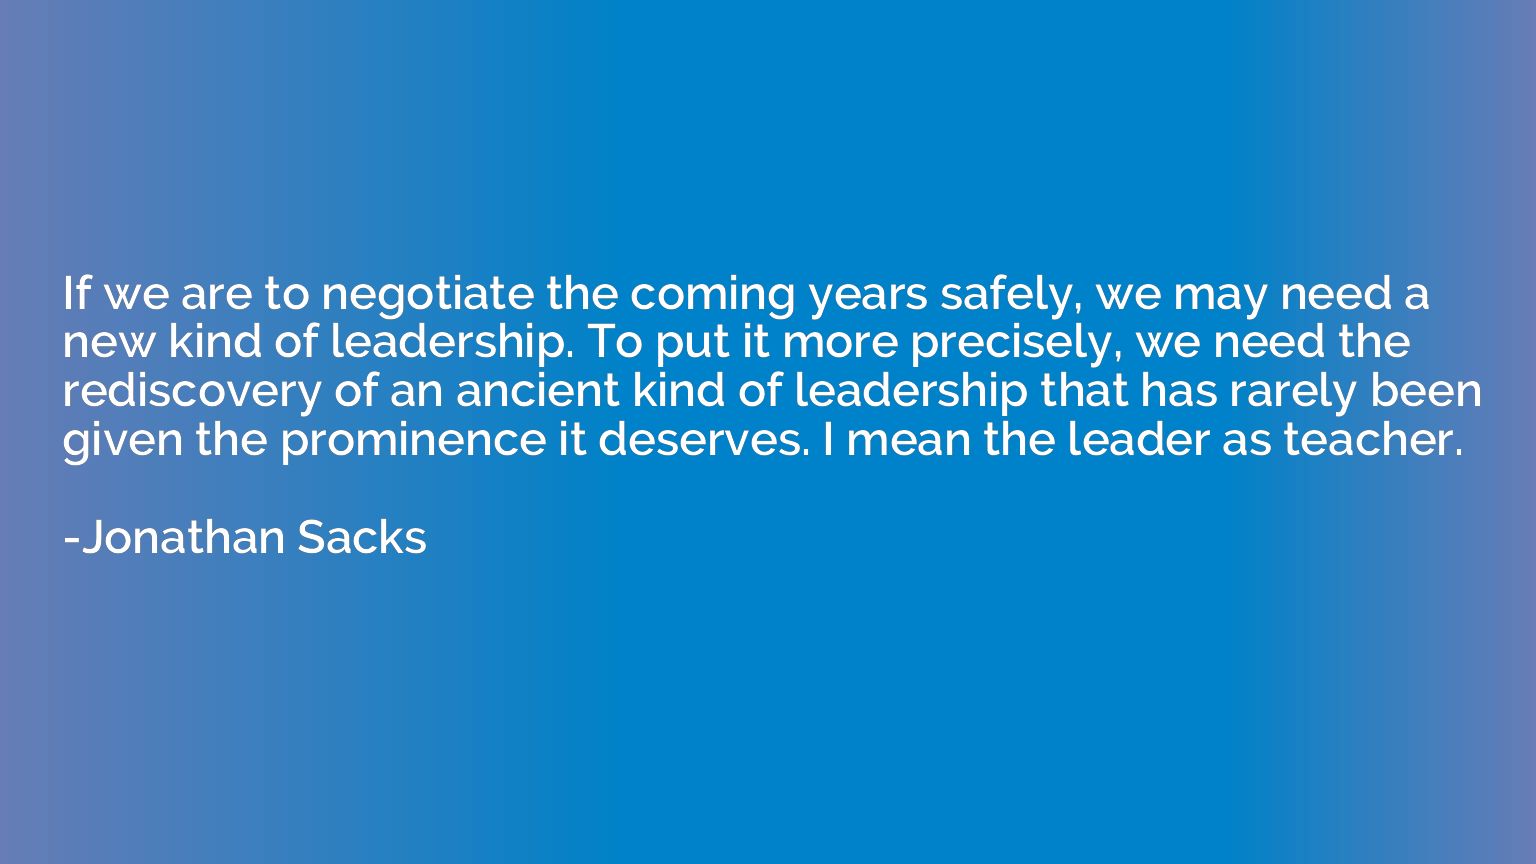 If we are to negotiate the coming years safely, we may need 